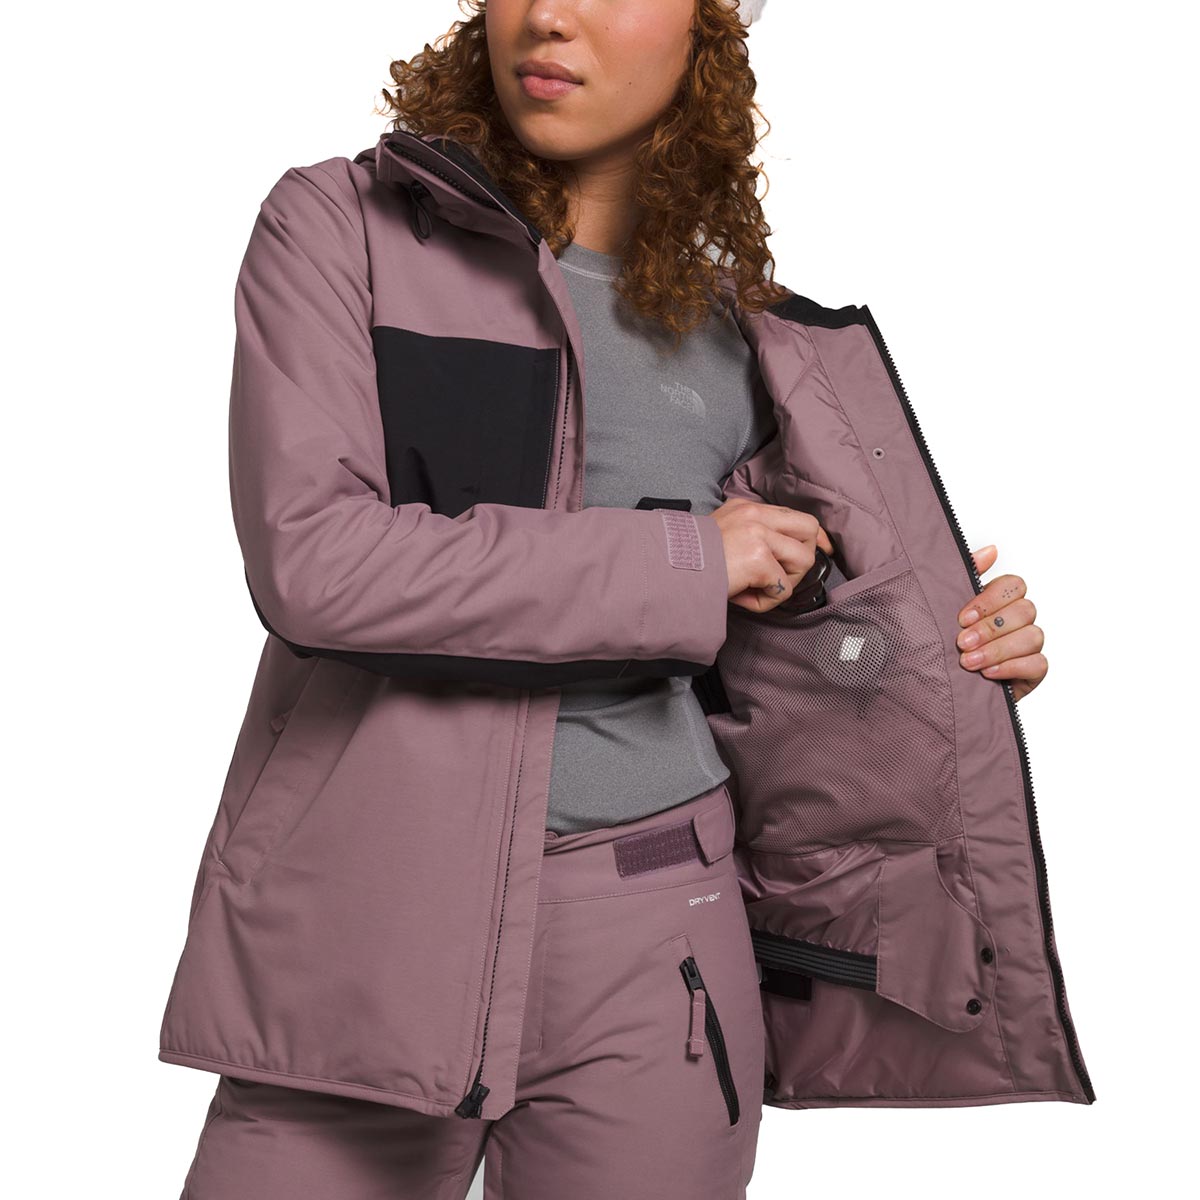 THE NORTH FACE - NAMAK INSULATED JACKET